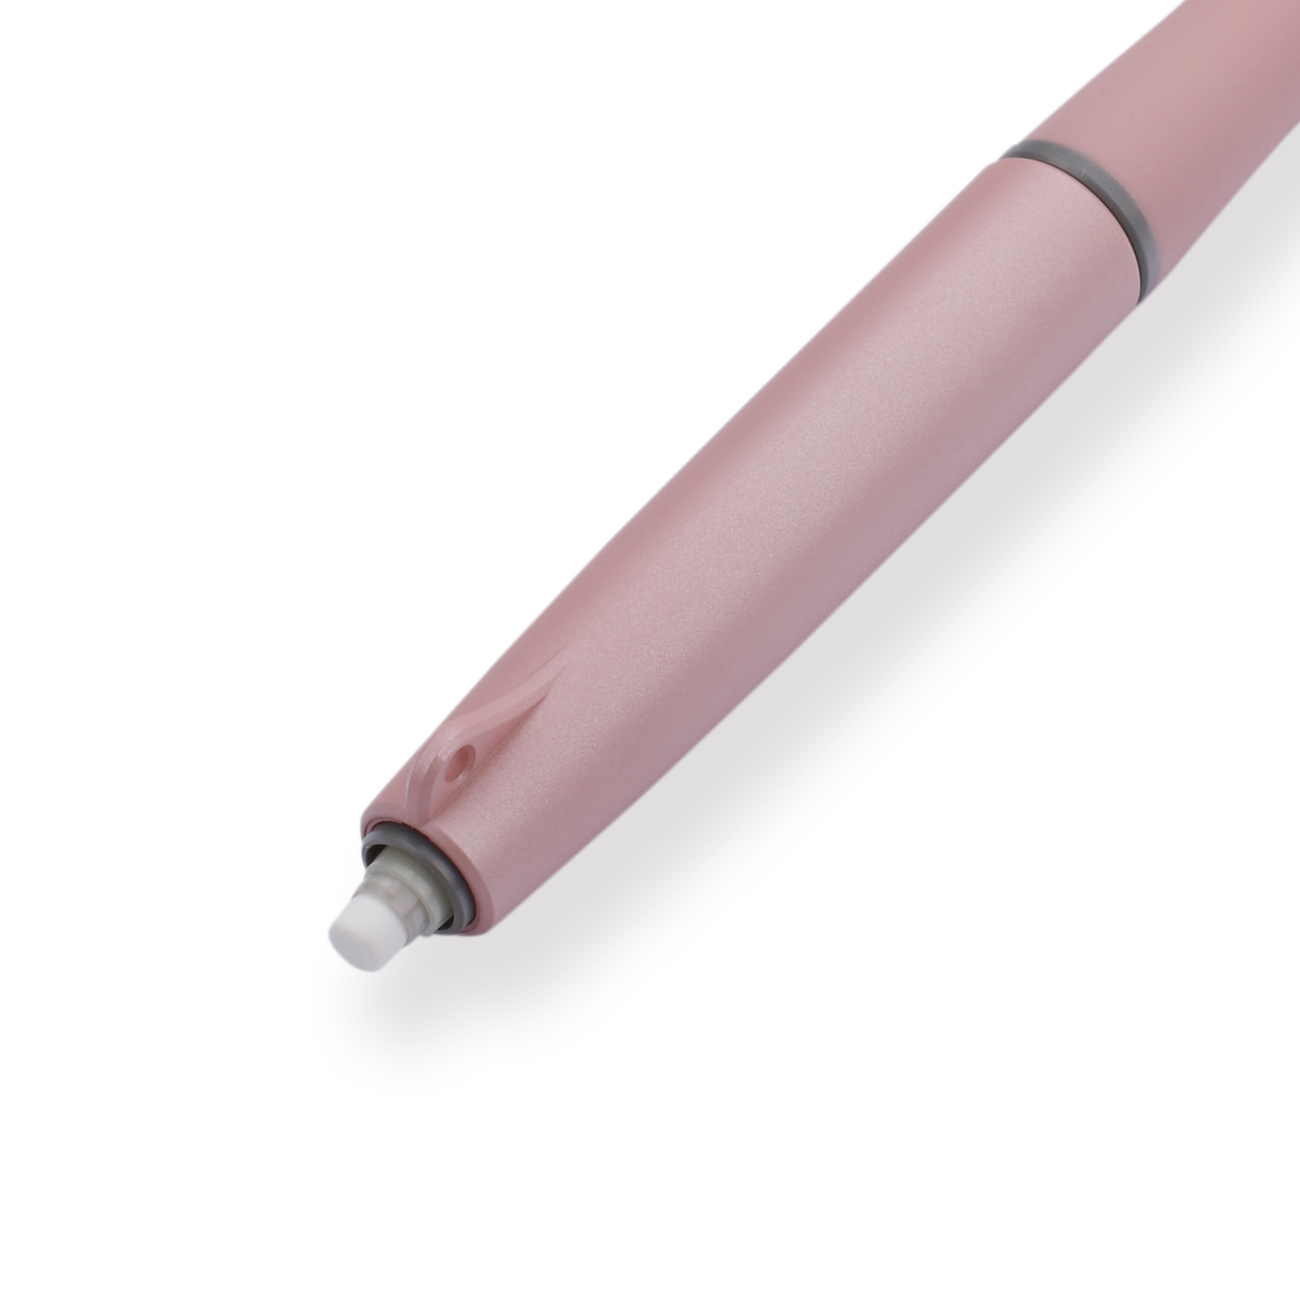 Pilot THE Dr. Grip Limited Mechanical Pencil - 0.5 mm - Beige Pink - Stationery Pal